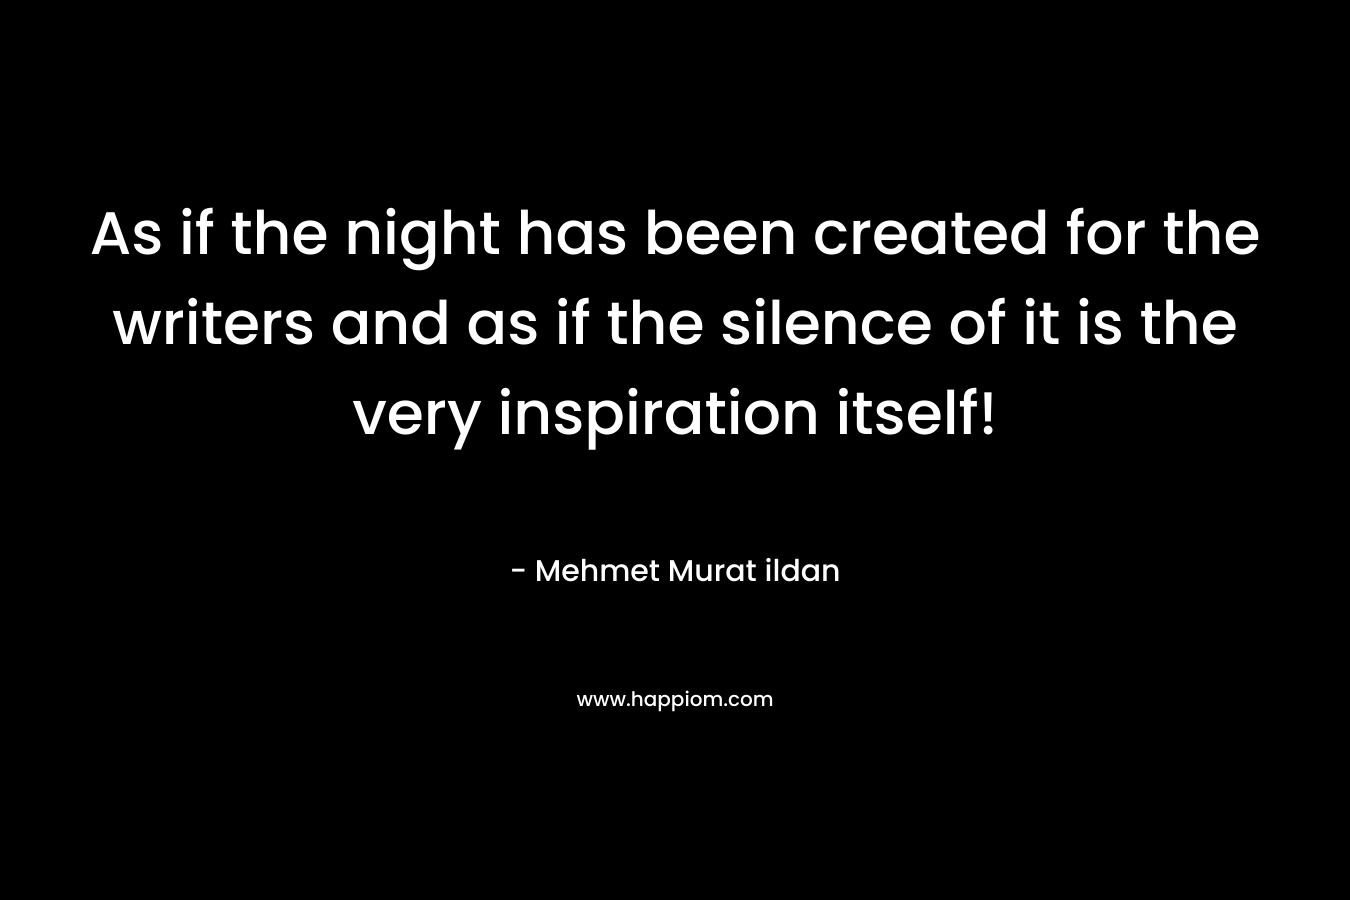 As if the night has been created for the writers and as if the silence of it is the very inspiration itself! – Mehmet Murat ildan